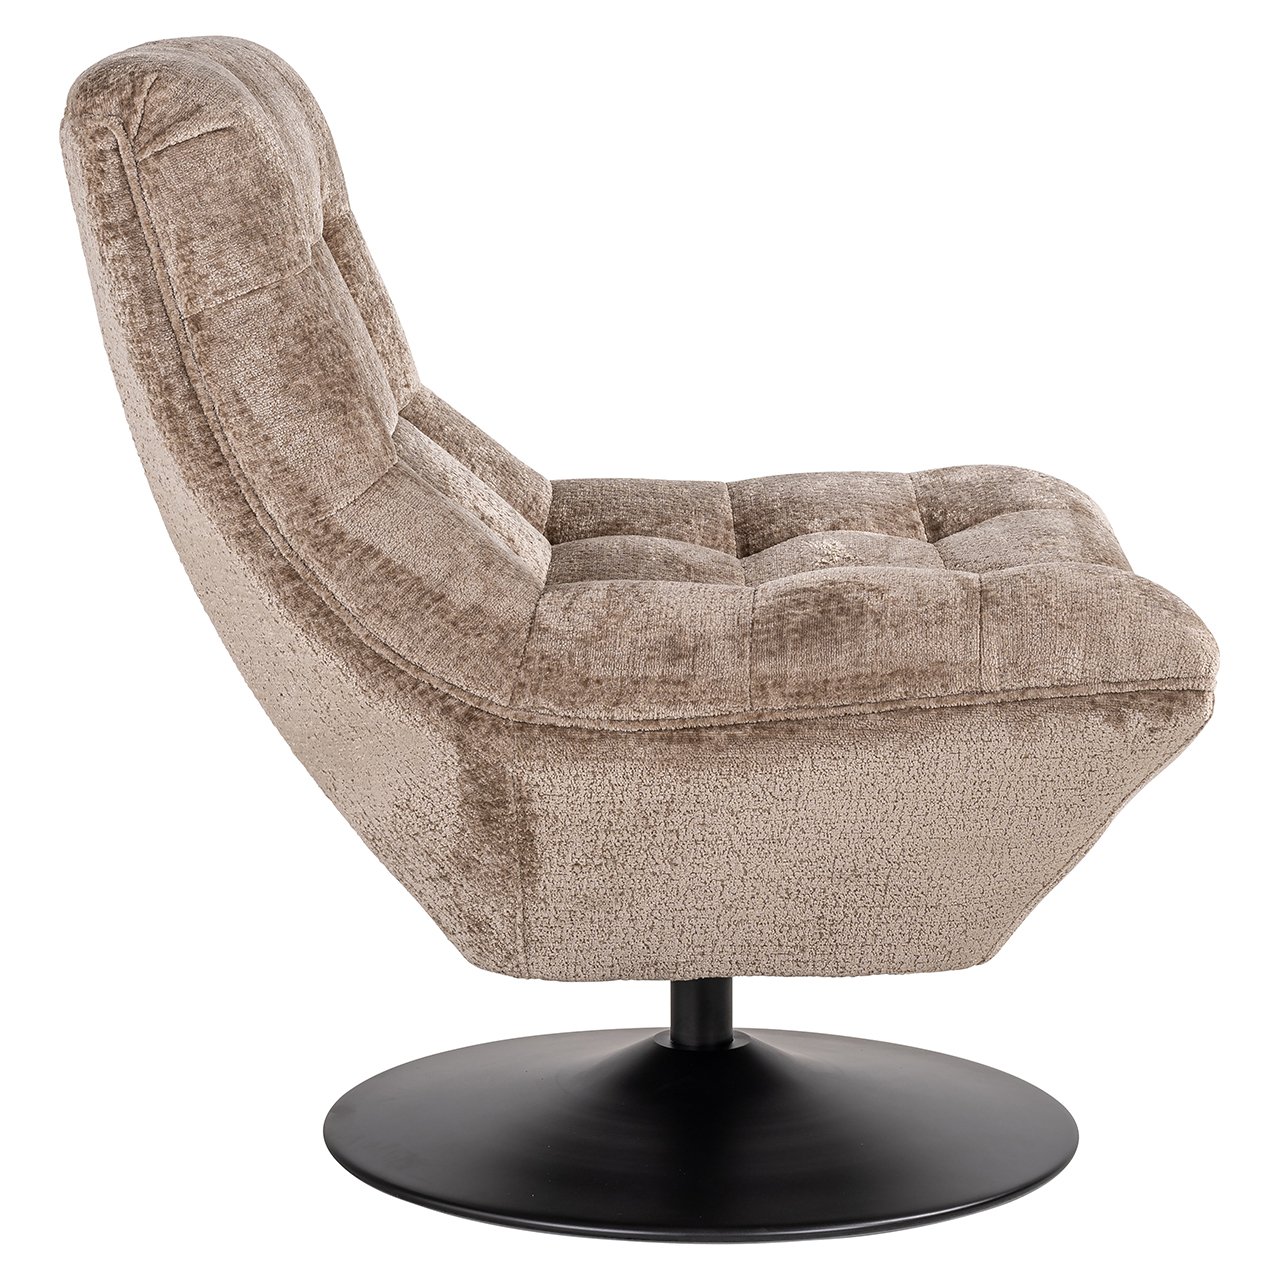 Drehsessel Sydney taupe chenille (Bergen 104 taupe chenille)